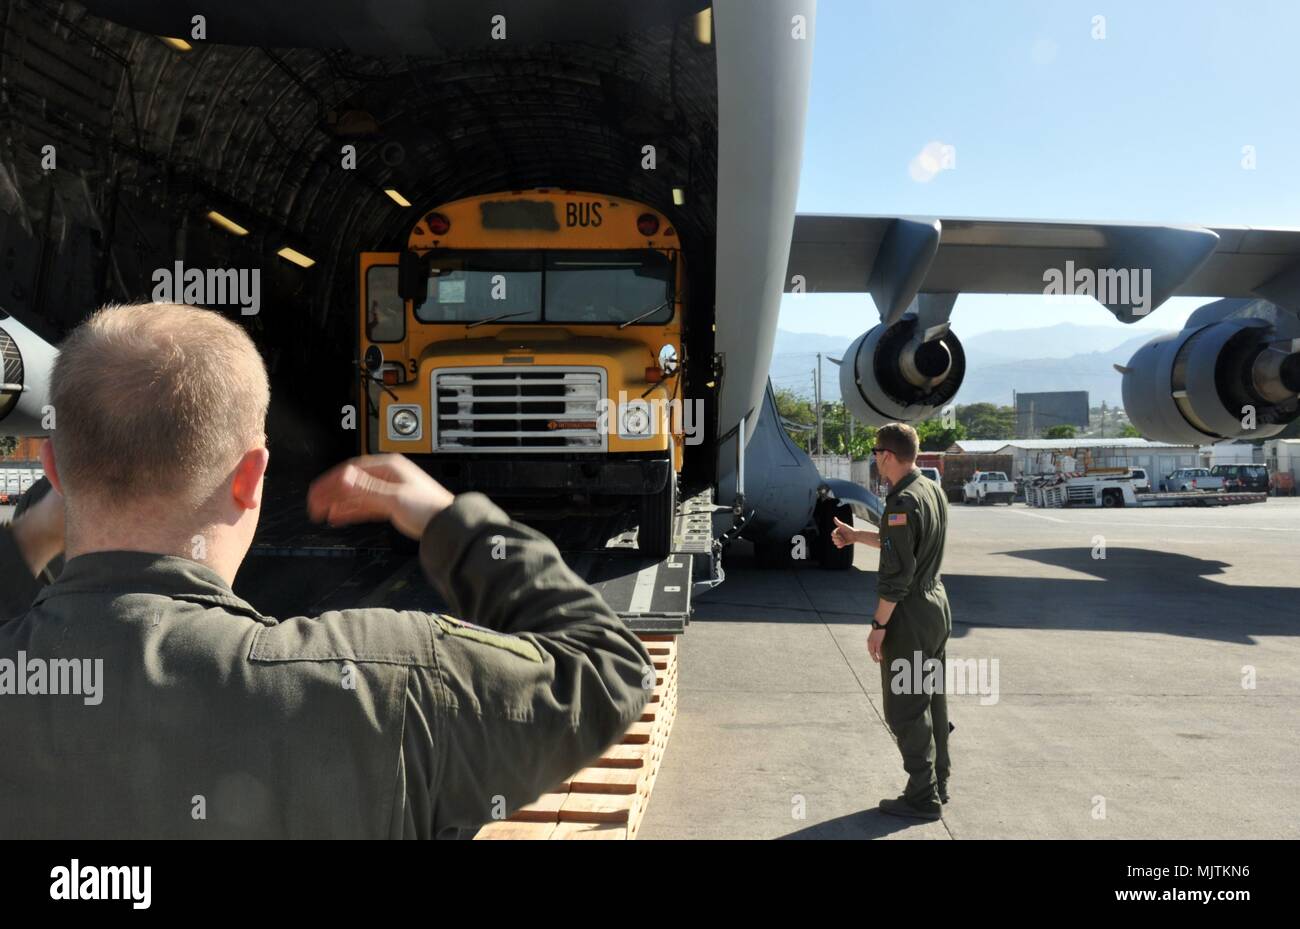 Staff Sgt. Paul Sizemore, loadmaster with Joint Base Charleston's 317th Airlift Squadron, left, with assistance from Capt. Gus Morse, guides the offloading of school buses from a C-17 aircraft in Port-au-Prince, Haiti, December 16, 2017. The buses are destined for a local school run by outreach organizations Those Angels Foundation and Sister Cities International, and were transported as part of the Denton program, which allows for space available on military aircraft to be used for humanitarian cargo. (U.S. Air Force photo by Capt. Justin Clark) Stock Photo